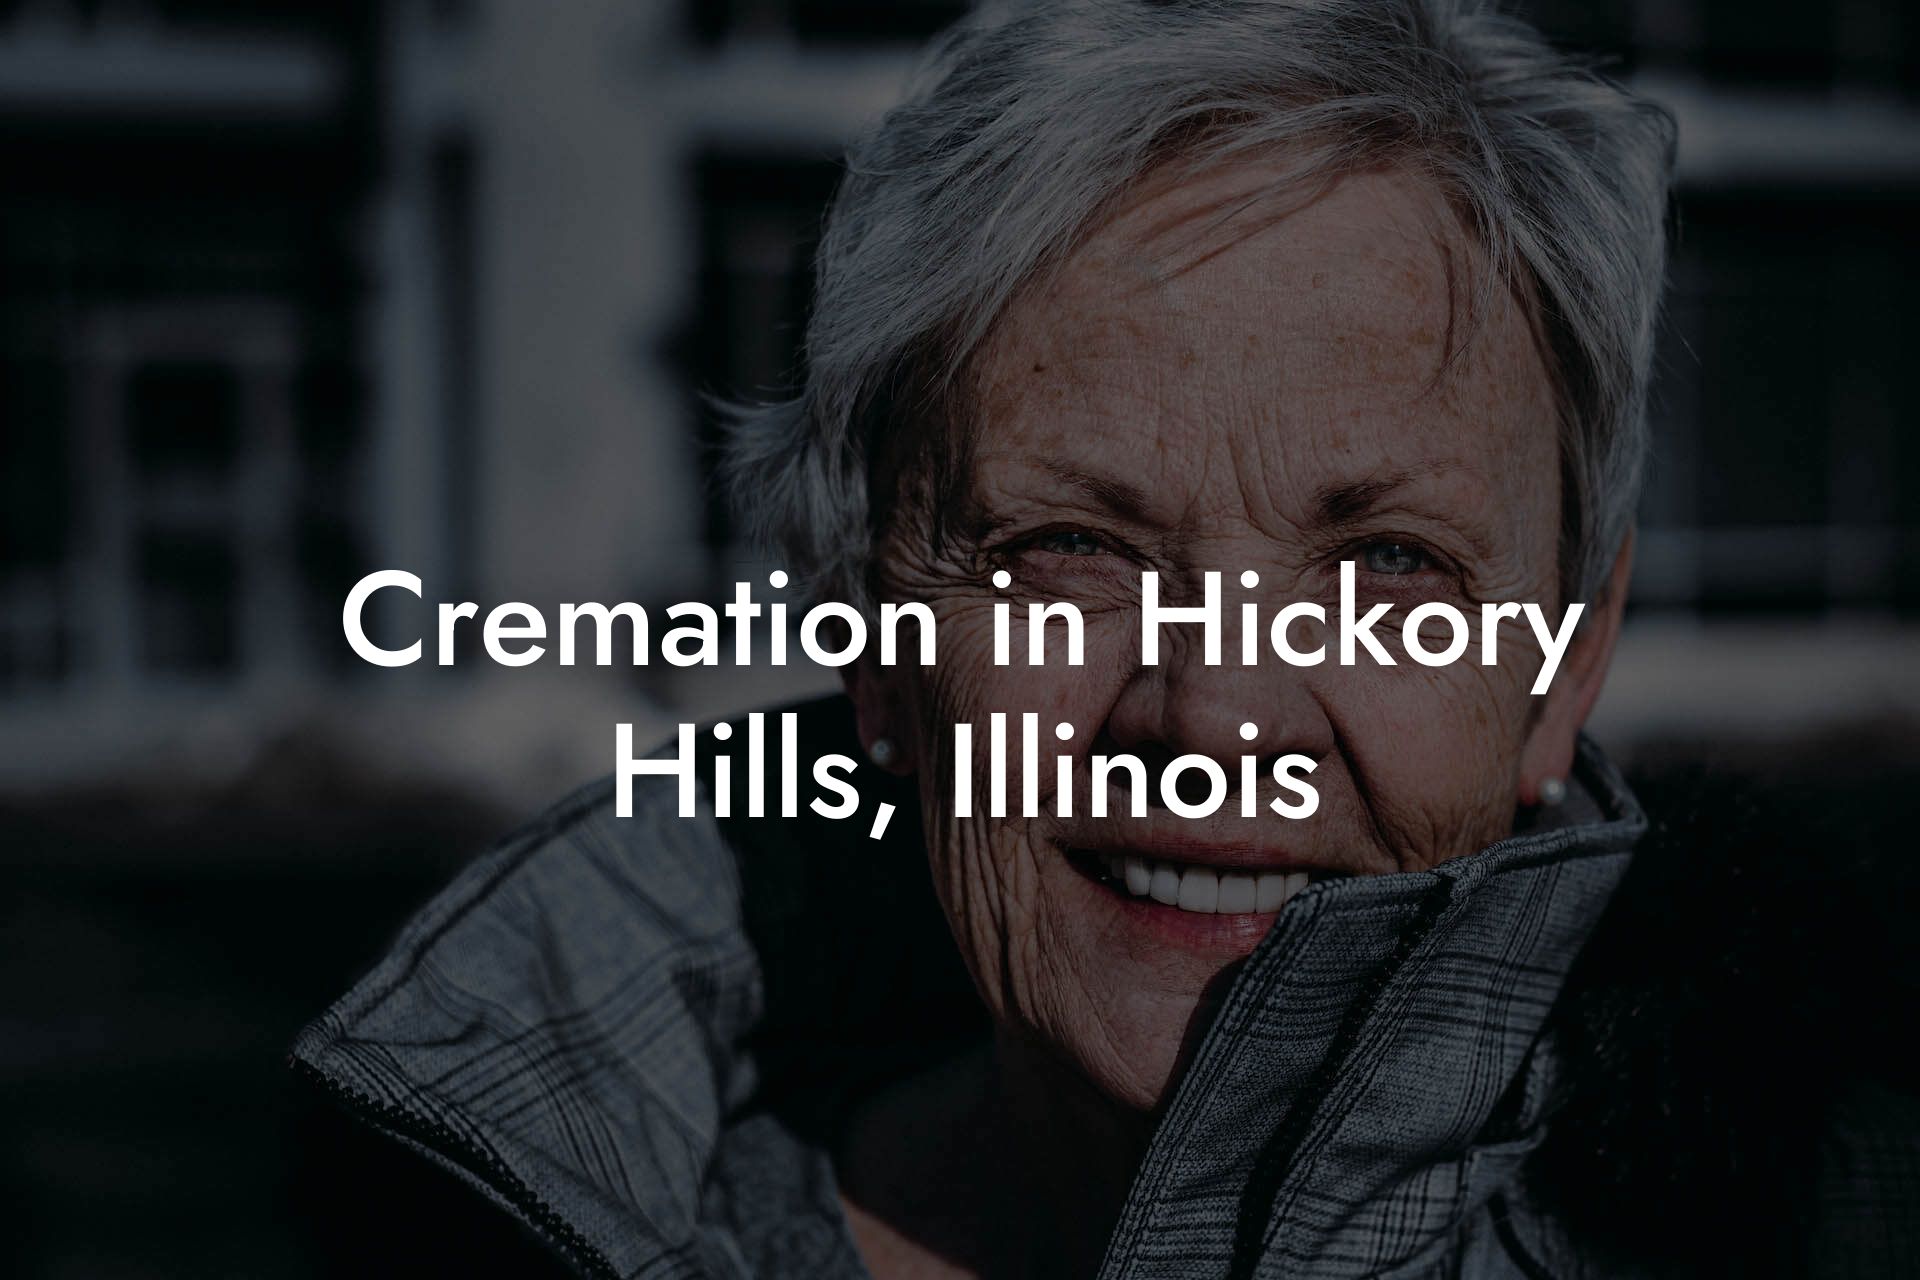 Cremation in Hickory Hills, Illinois